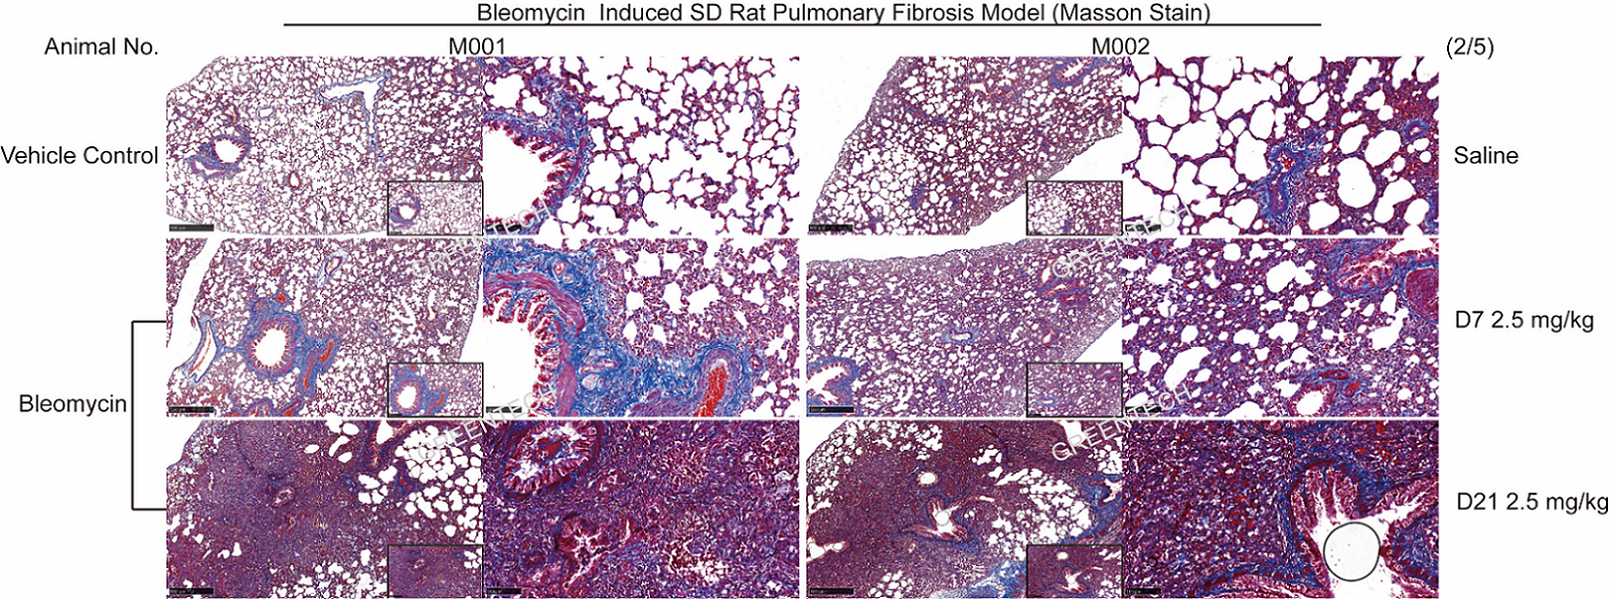 Lung section staining of bleomycin induced pulmonary fibrosis model in rats.png